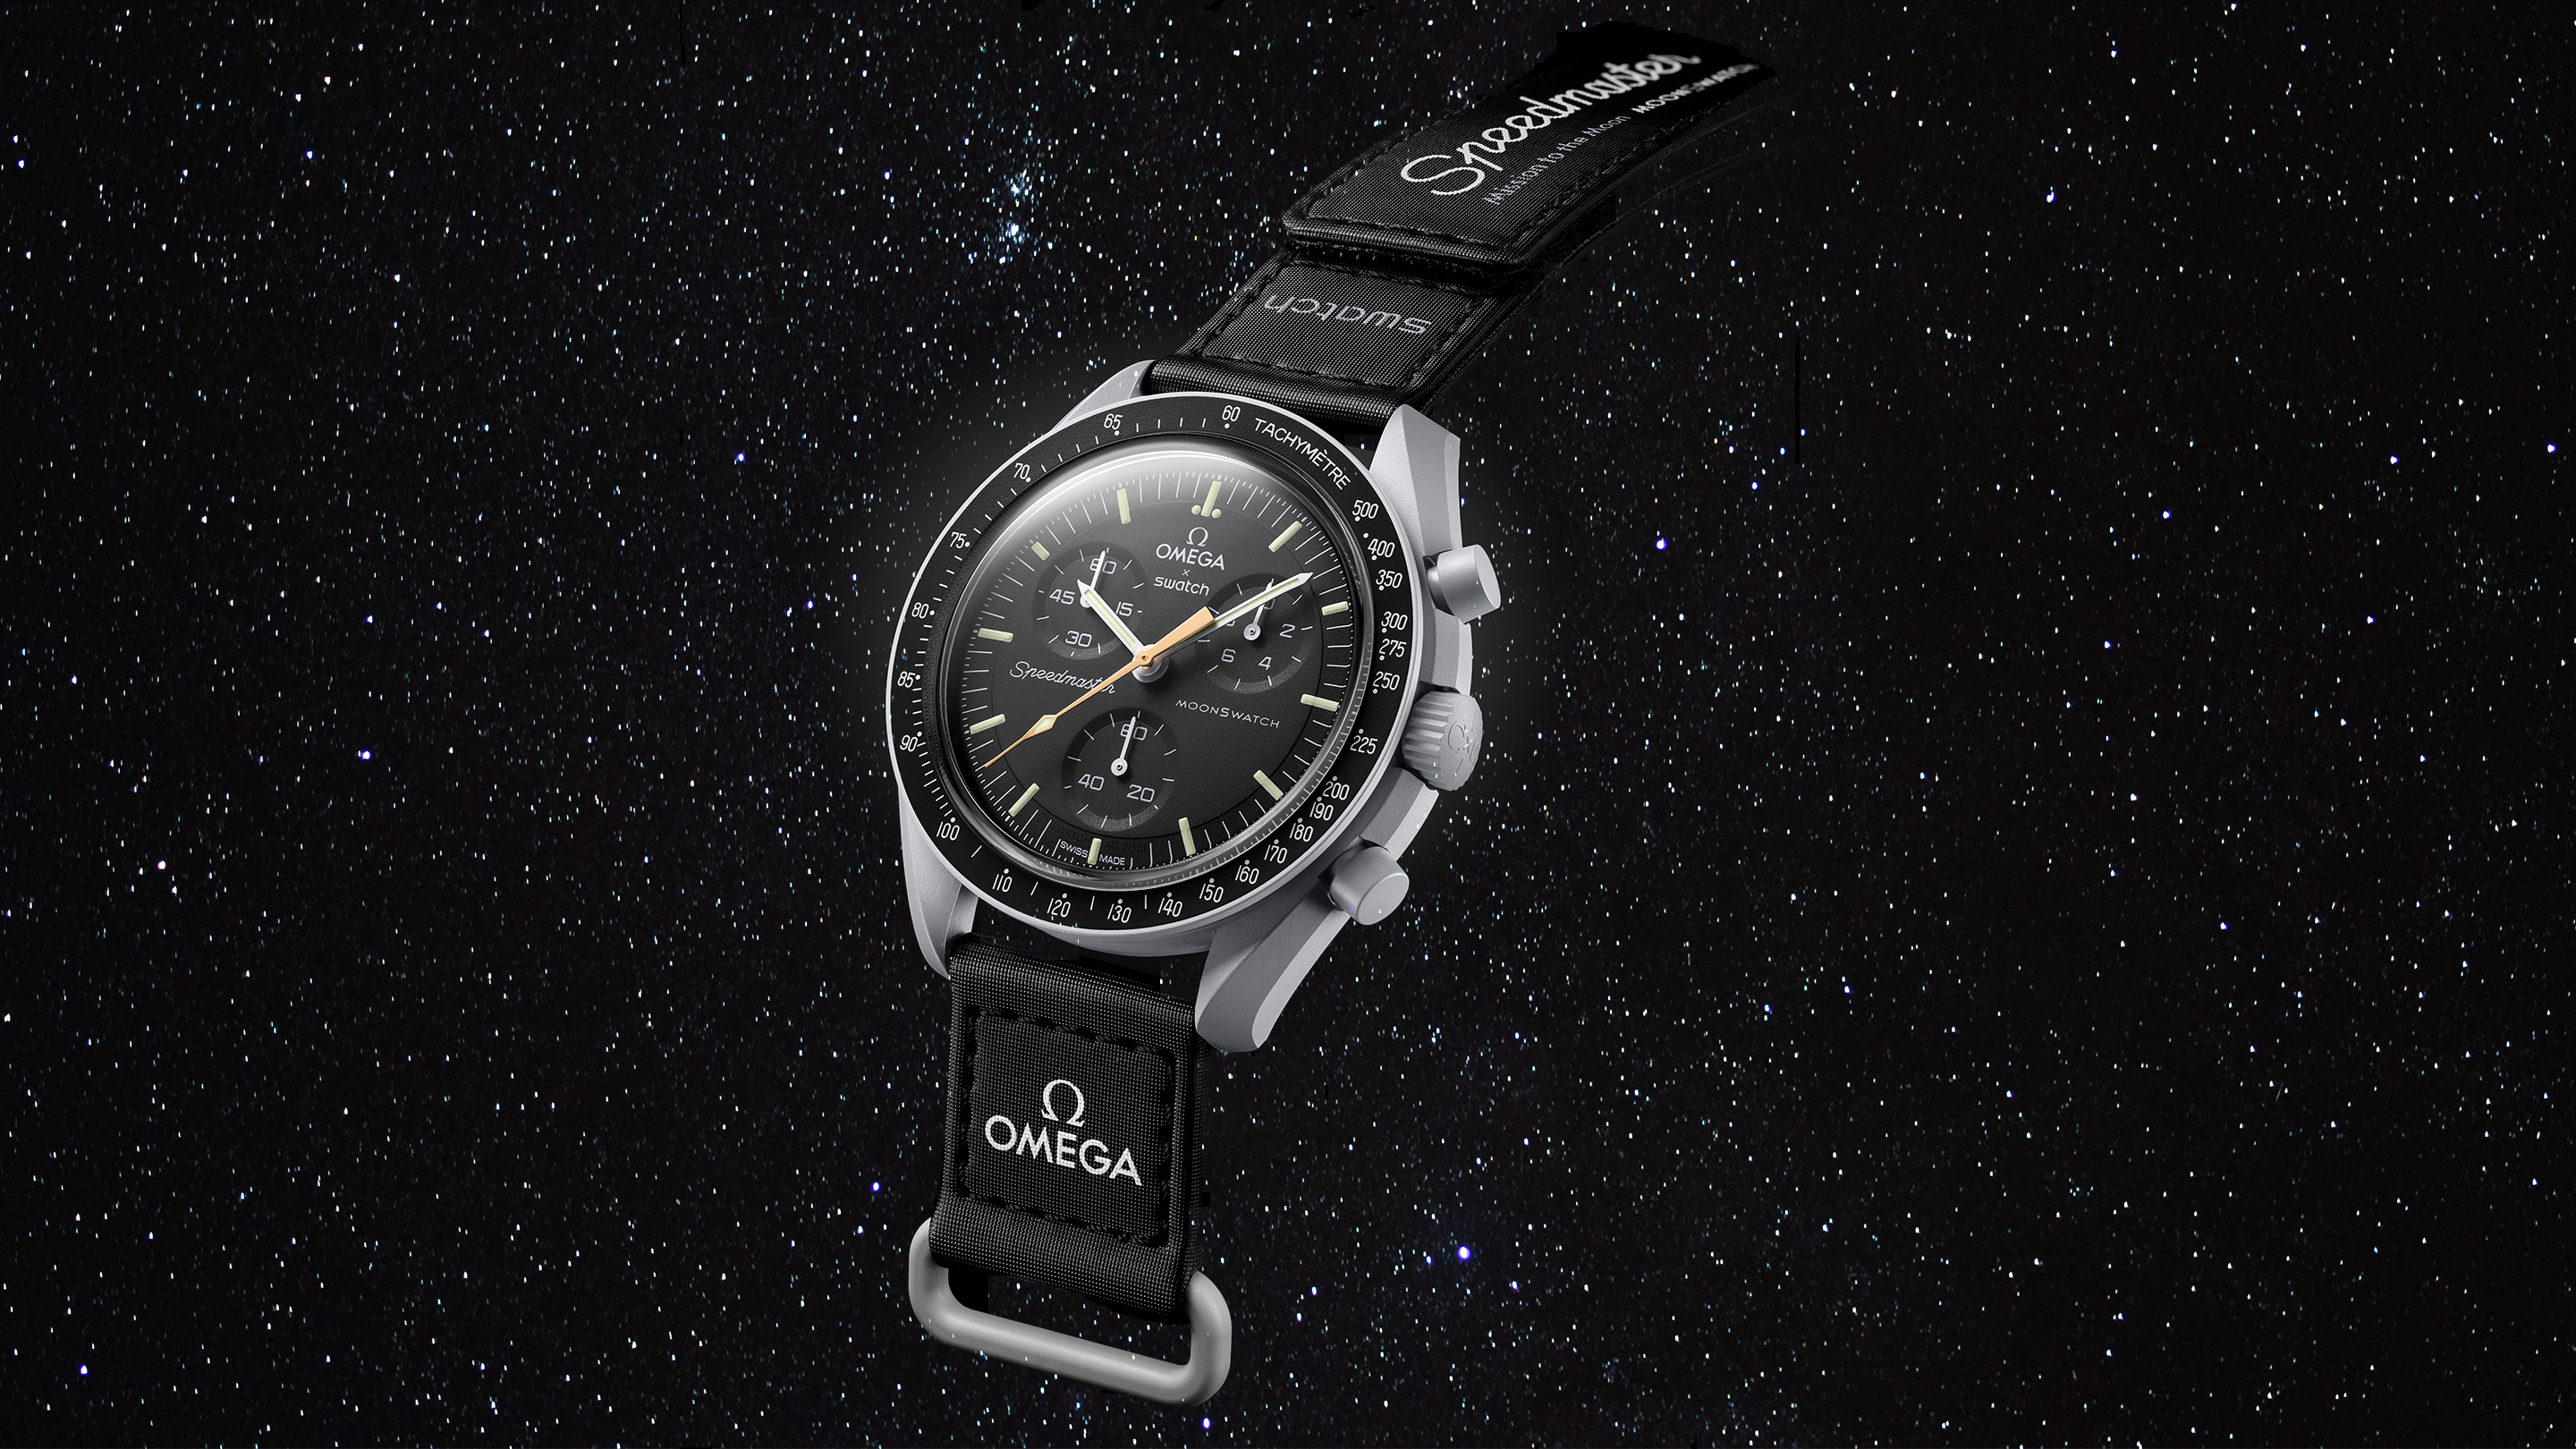 The New Omega x Swatch MoonSwatch Mission to Moonshine Gold